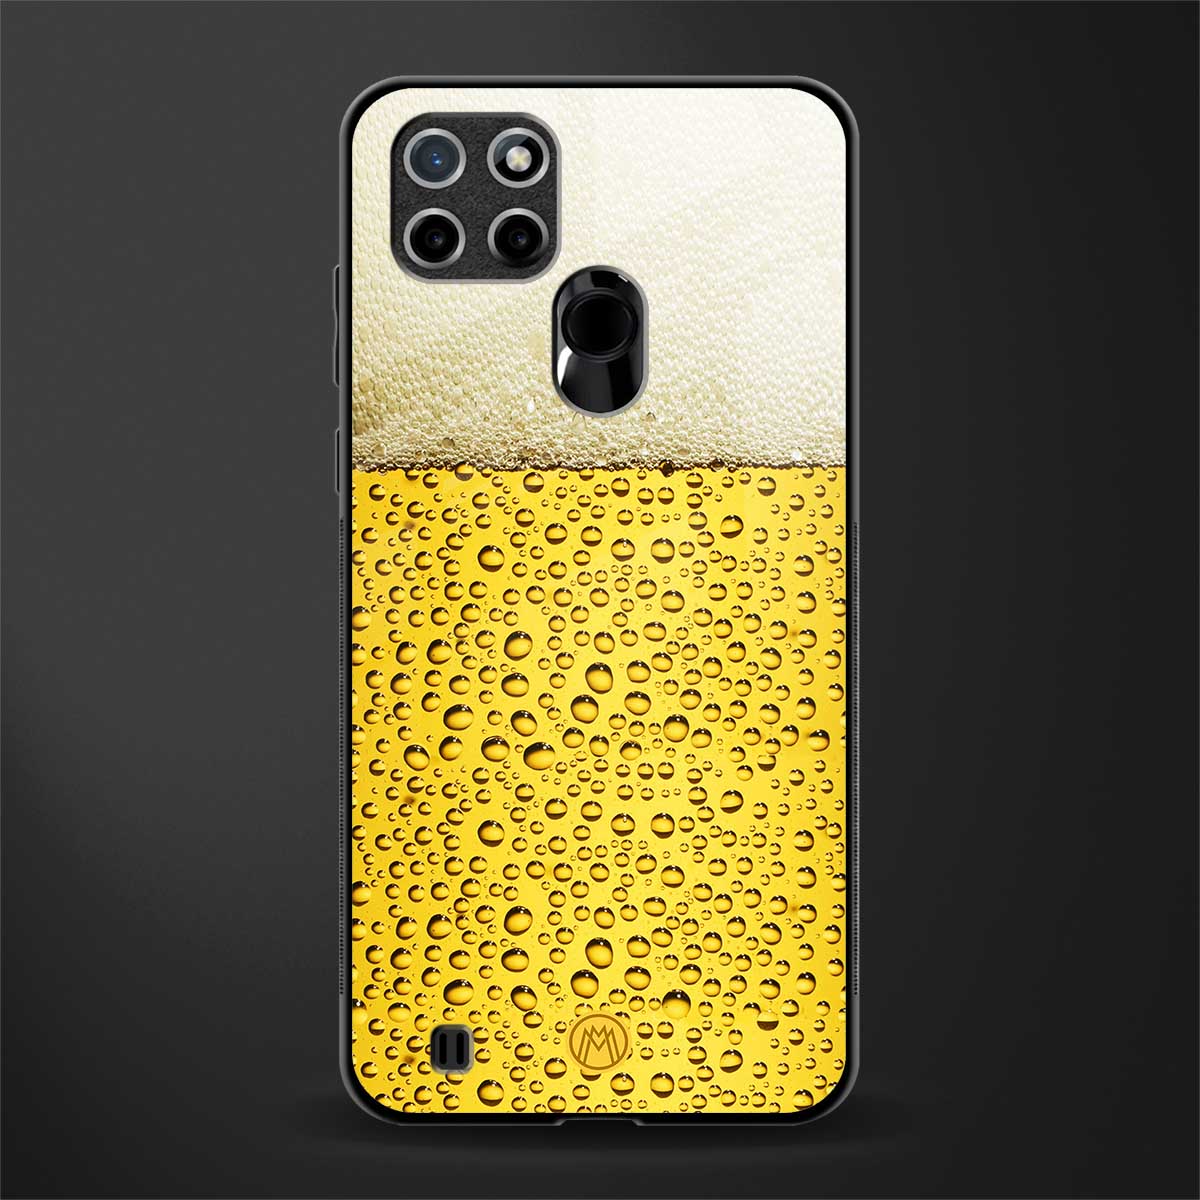 fizzy beer glass case for realme c21 image